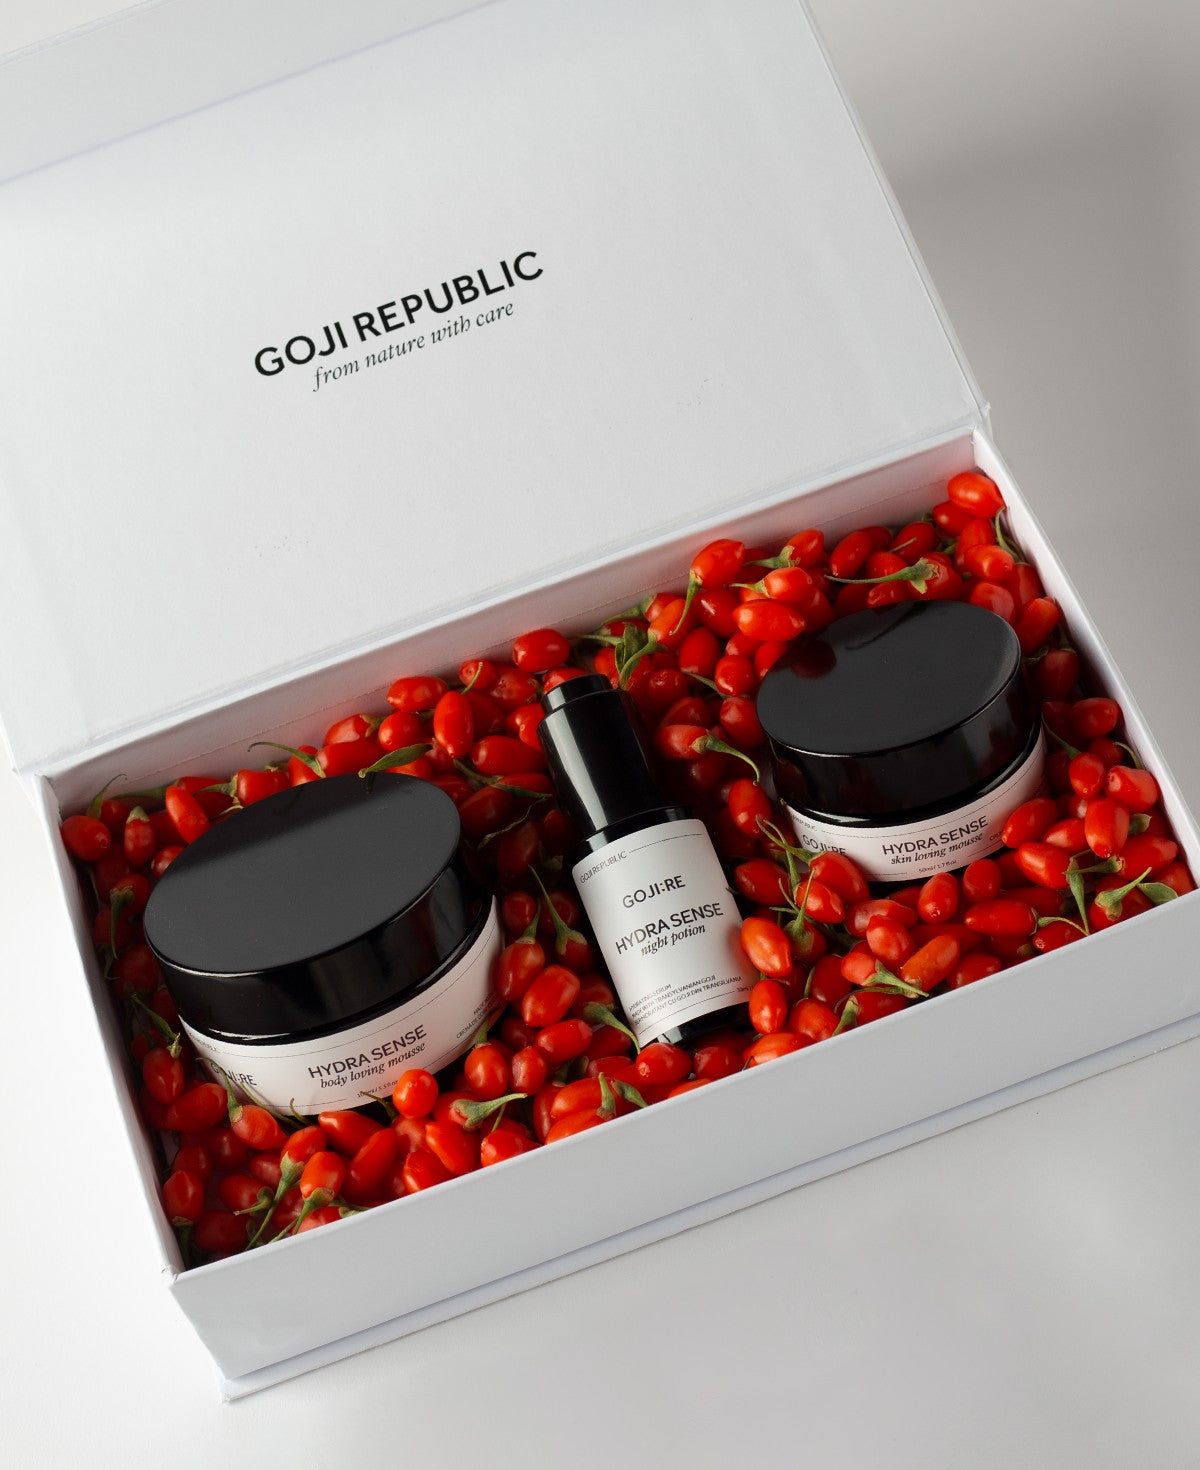 GOJI REPUBLIC UK GOJIRE UK GOJI:RE UK Hydrating cosmetic set with goji berries HYDRA SENSE Cosmetic set. 100% natural, handmade products. Includes face serum with goji berries, hand cream with goji berries and body cream with goji berries. The goji berries extract, with Vit C, Omega-9 fatty acids, linoleic acid, lavender, and jasmine and deliver intense hydrating properties and help to maintain a healthy and a radiant skin. Suitable for dry skin and with anti-ageing properties. Improves hyperpigmentation.